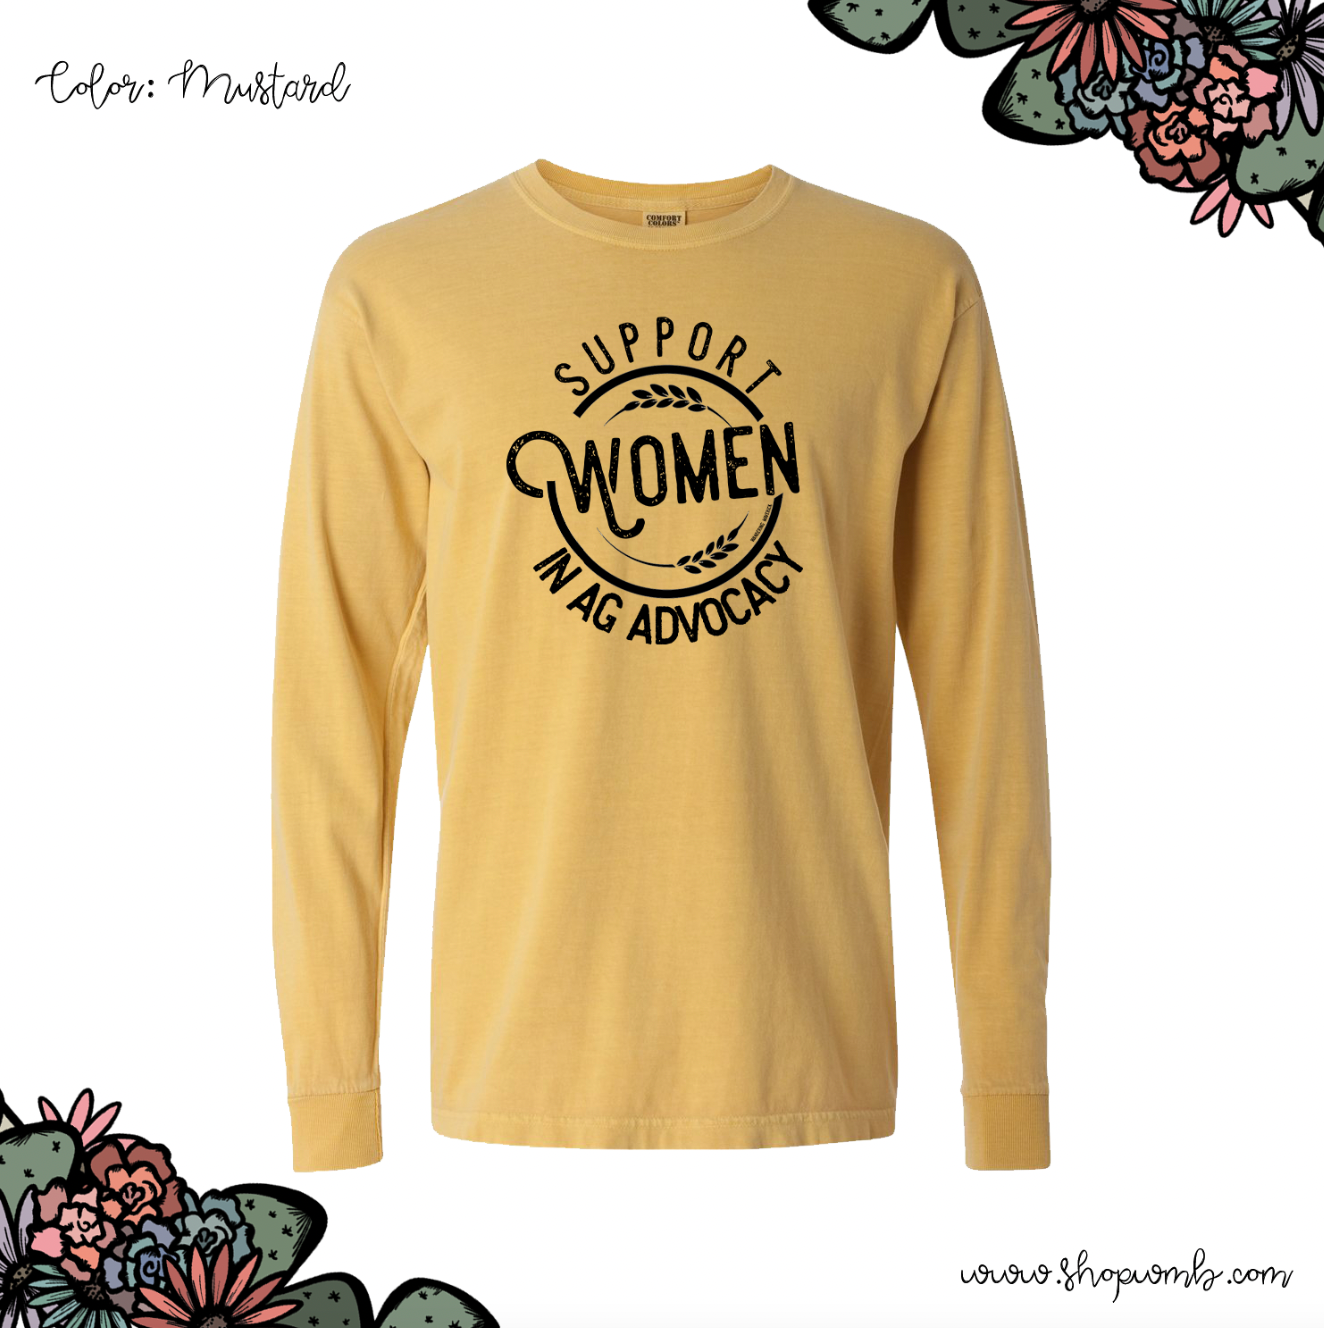 Support Women In Ag Advocacy LONG SLEEVE T-Shirt (S-3XL) - Multiple Colors!